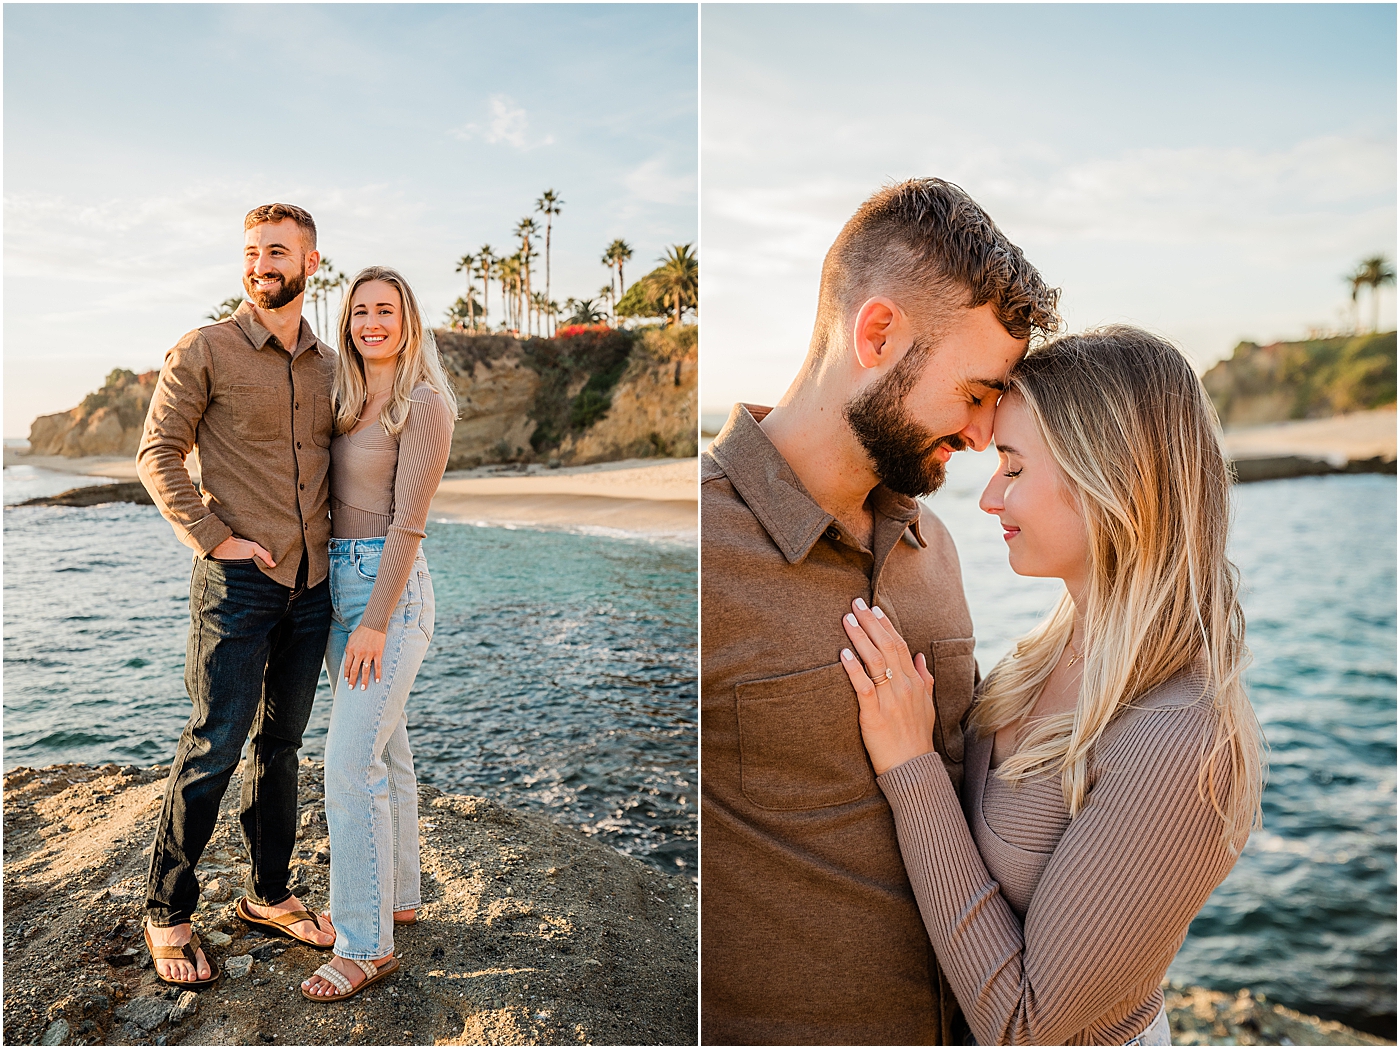 Laguna beach couples photography at Treasure Island Park. Couple standing together on rocks in front of the ocean.